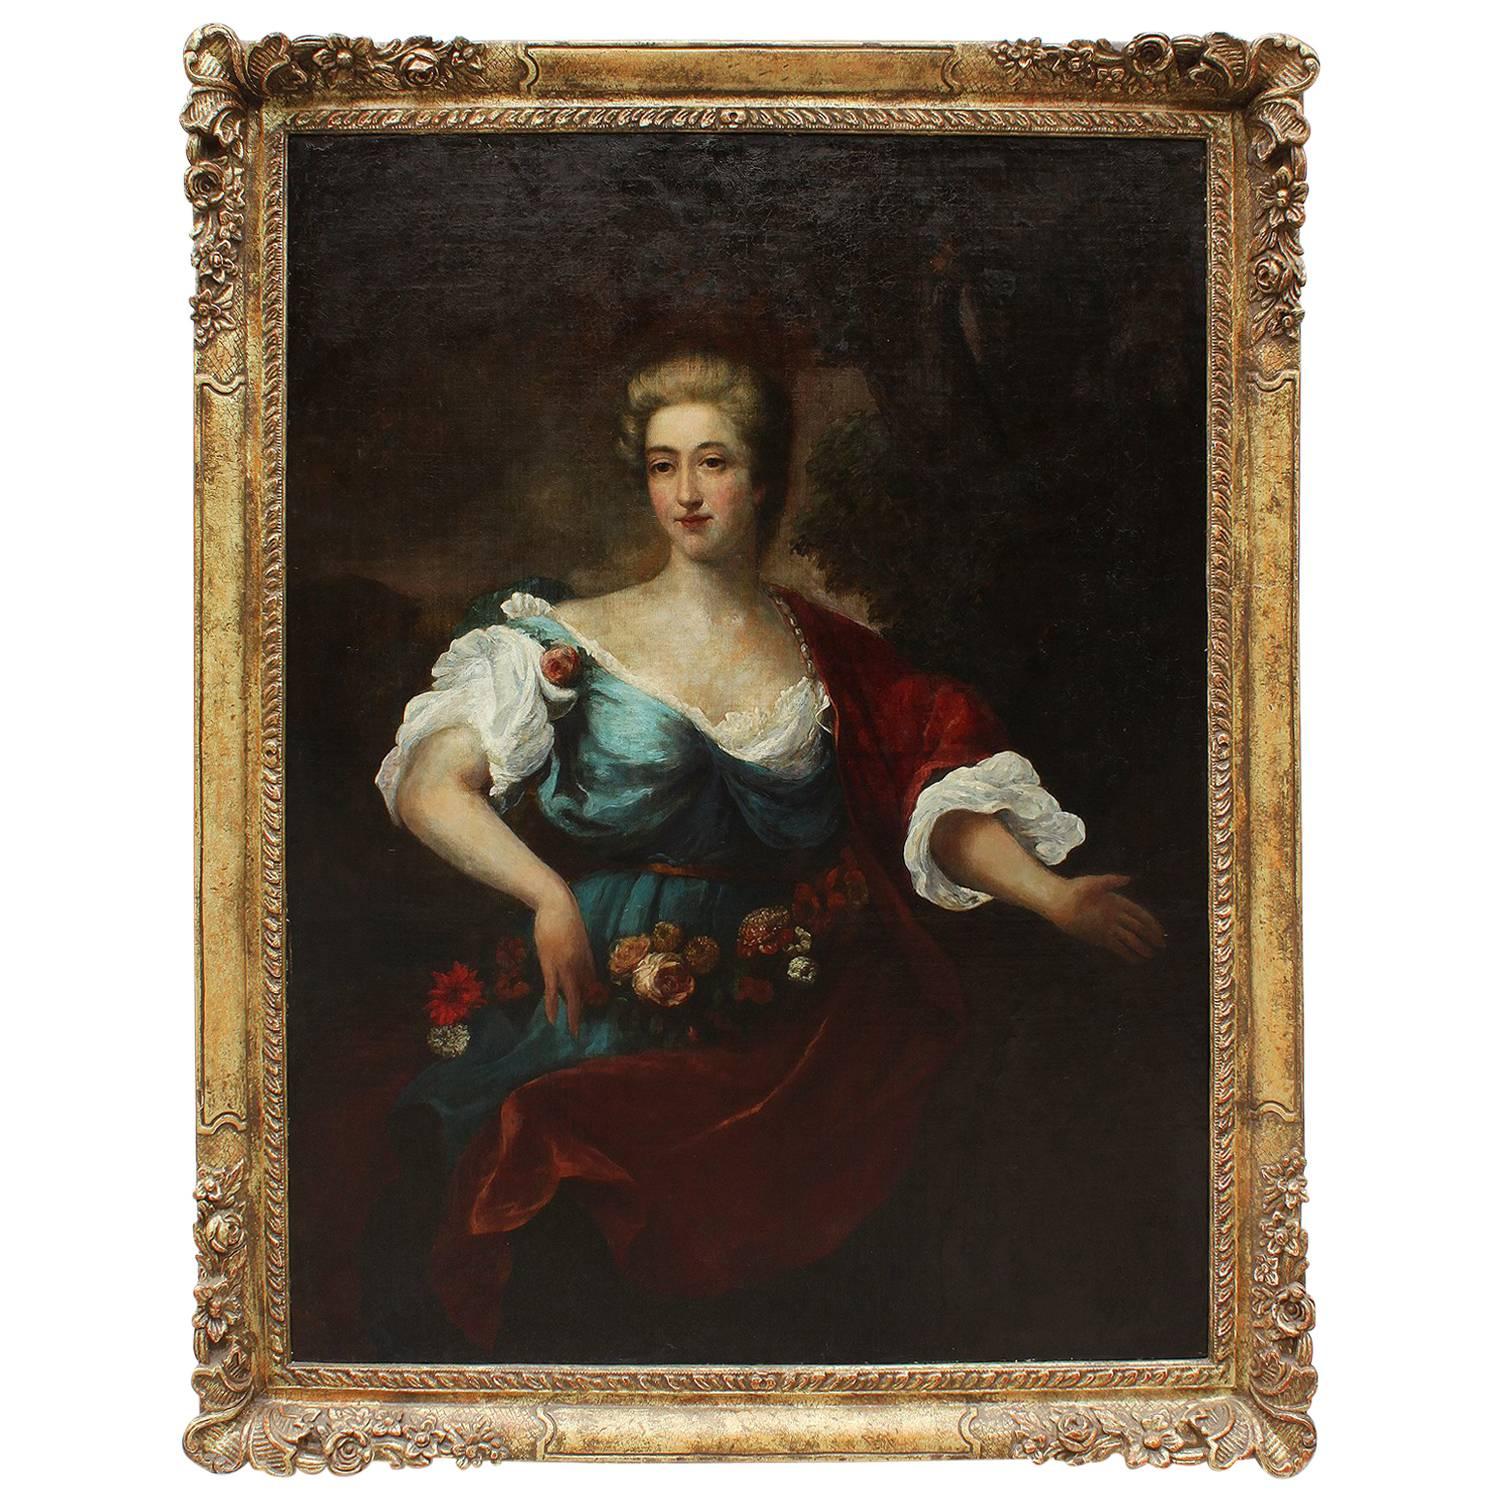 French 18th-19th Century Oil on Canvas Portrait of Lady, after Jean-Marc Nattier